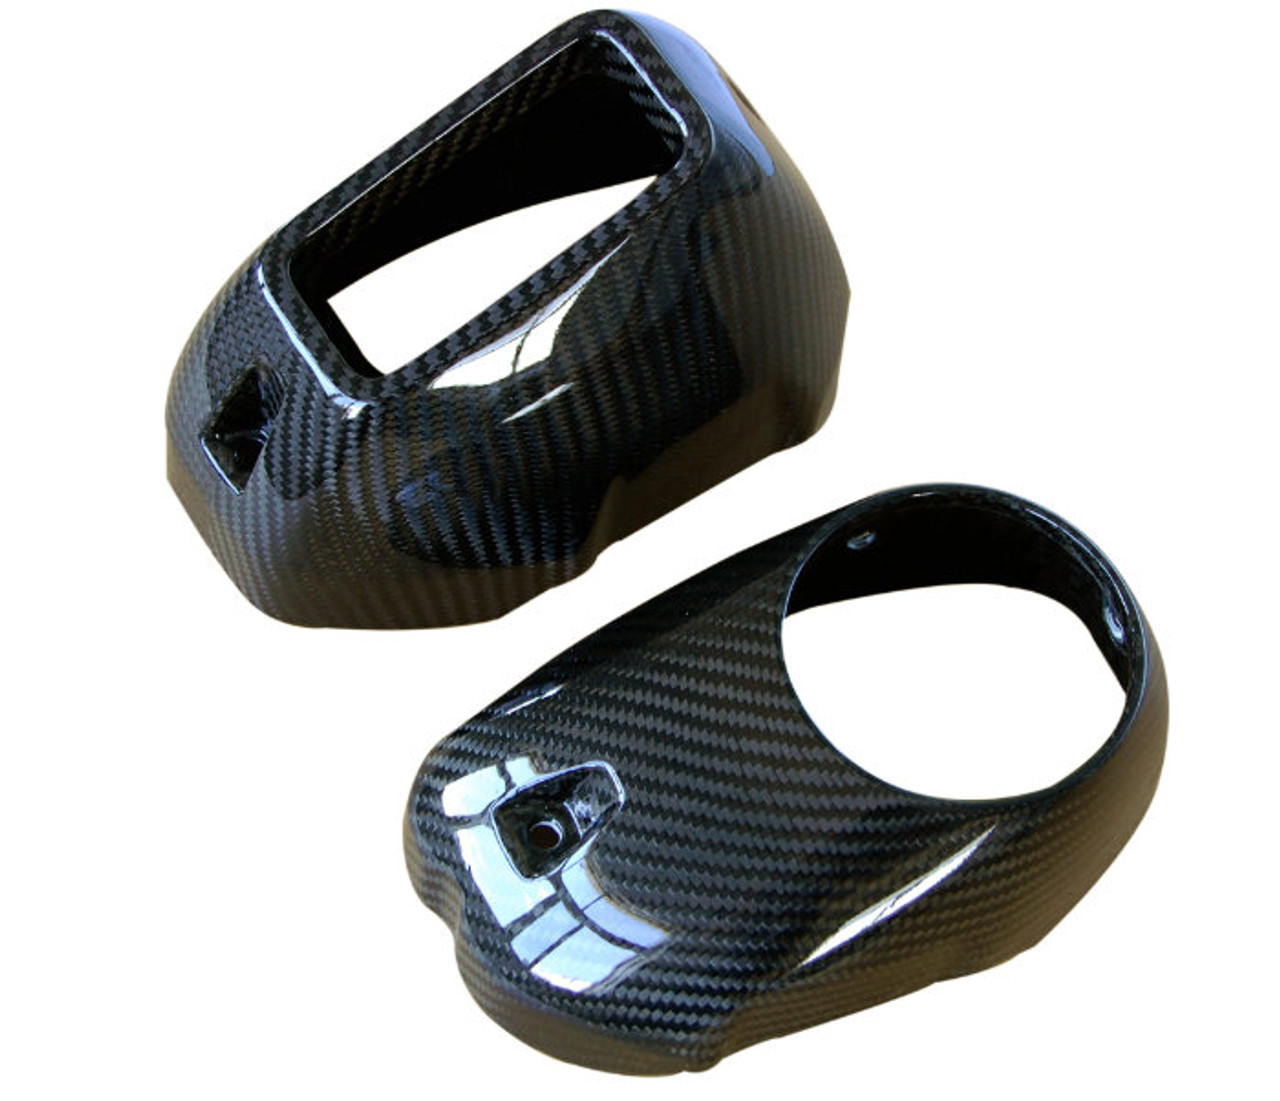 Exhaust Trim (upper and lower) in Glossy Twill Weave Carbon Fiber for BMW R1200GS, R1250GS 2013-2023 (Fits ADV)